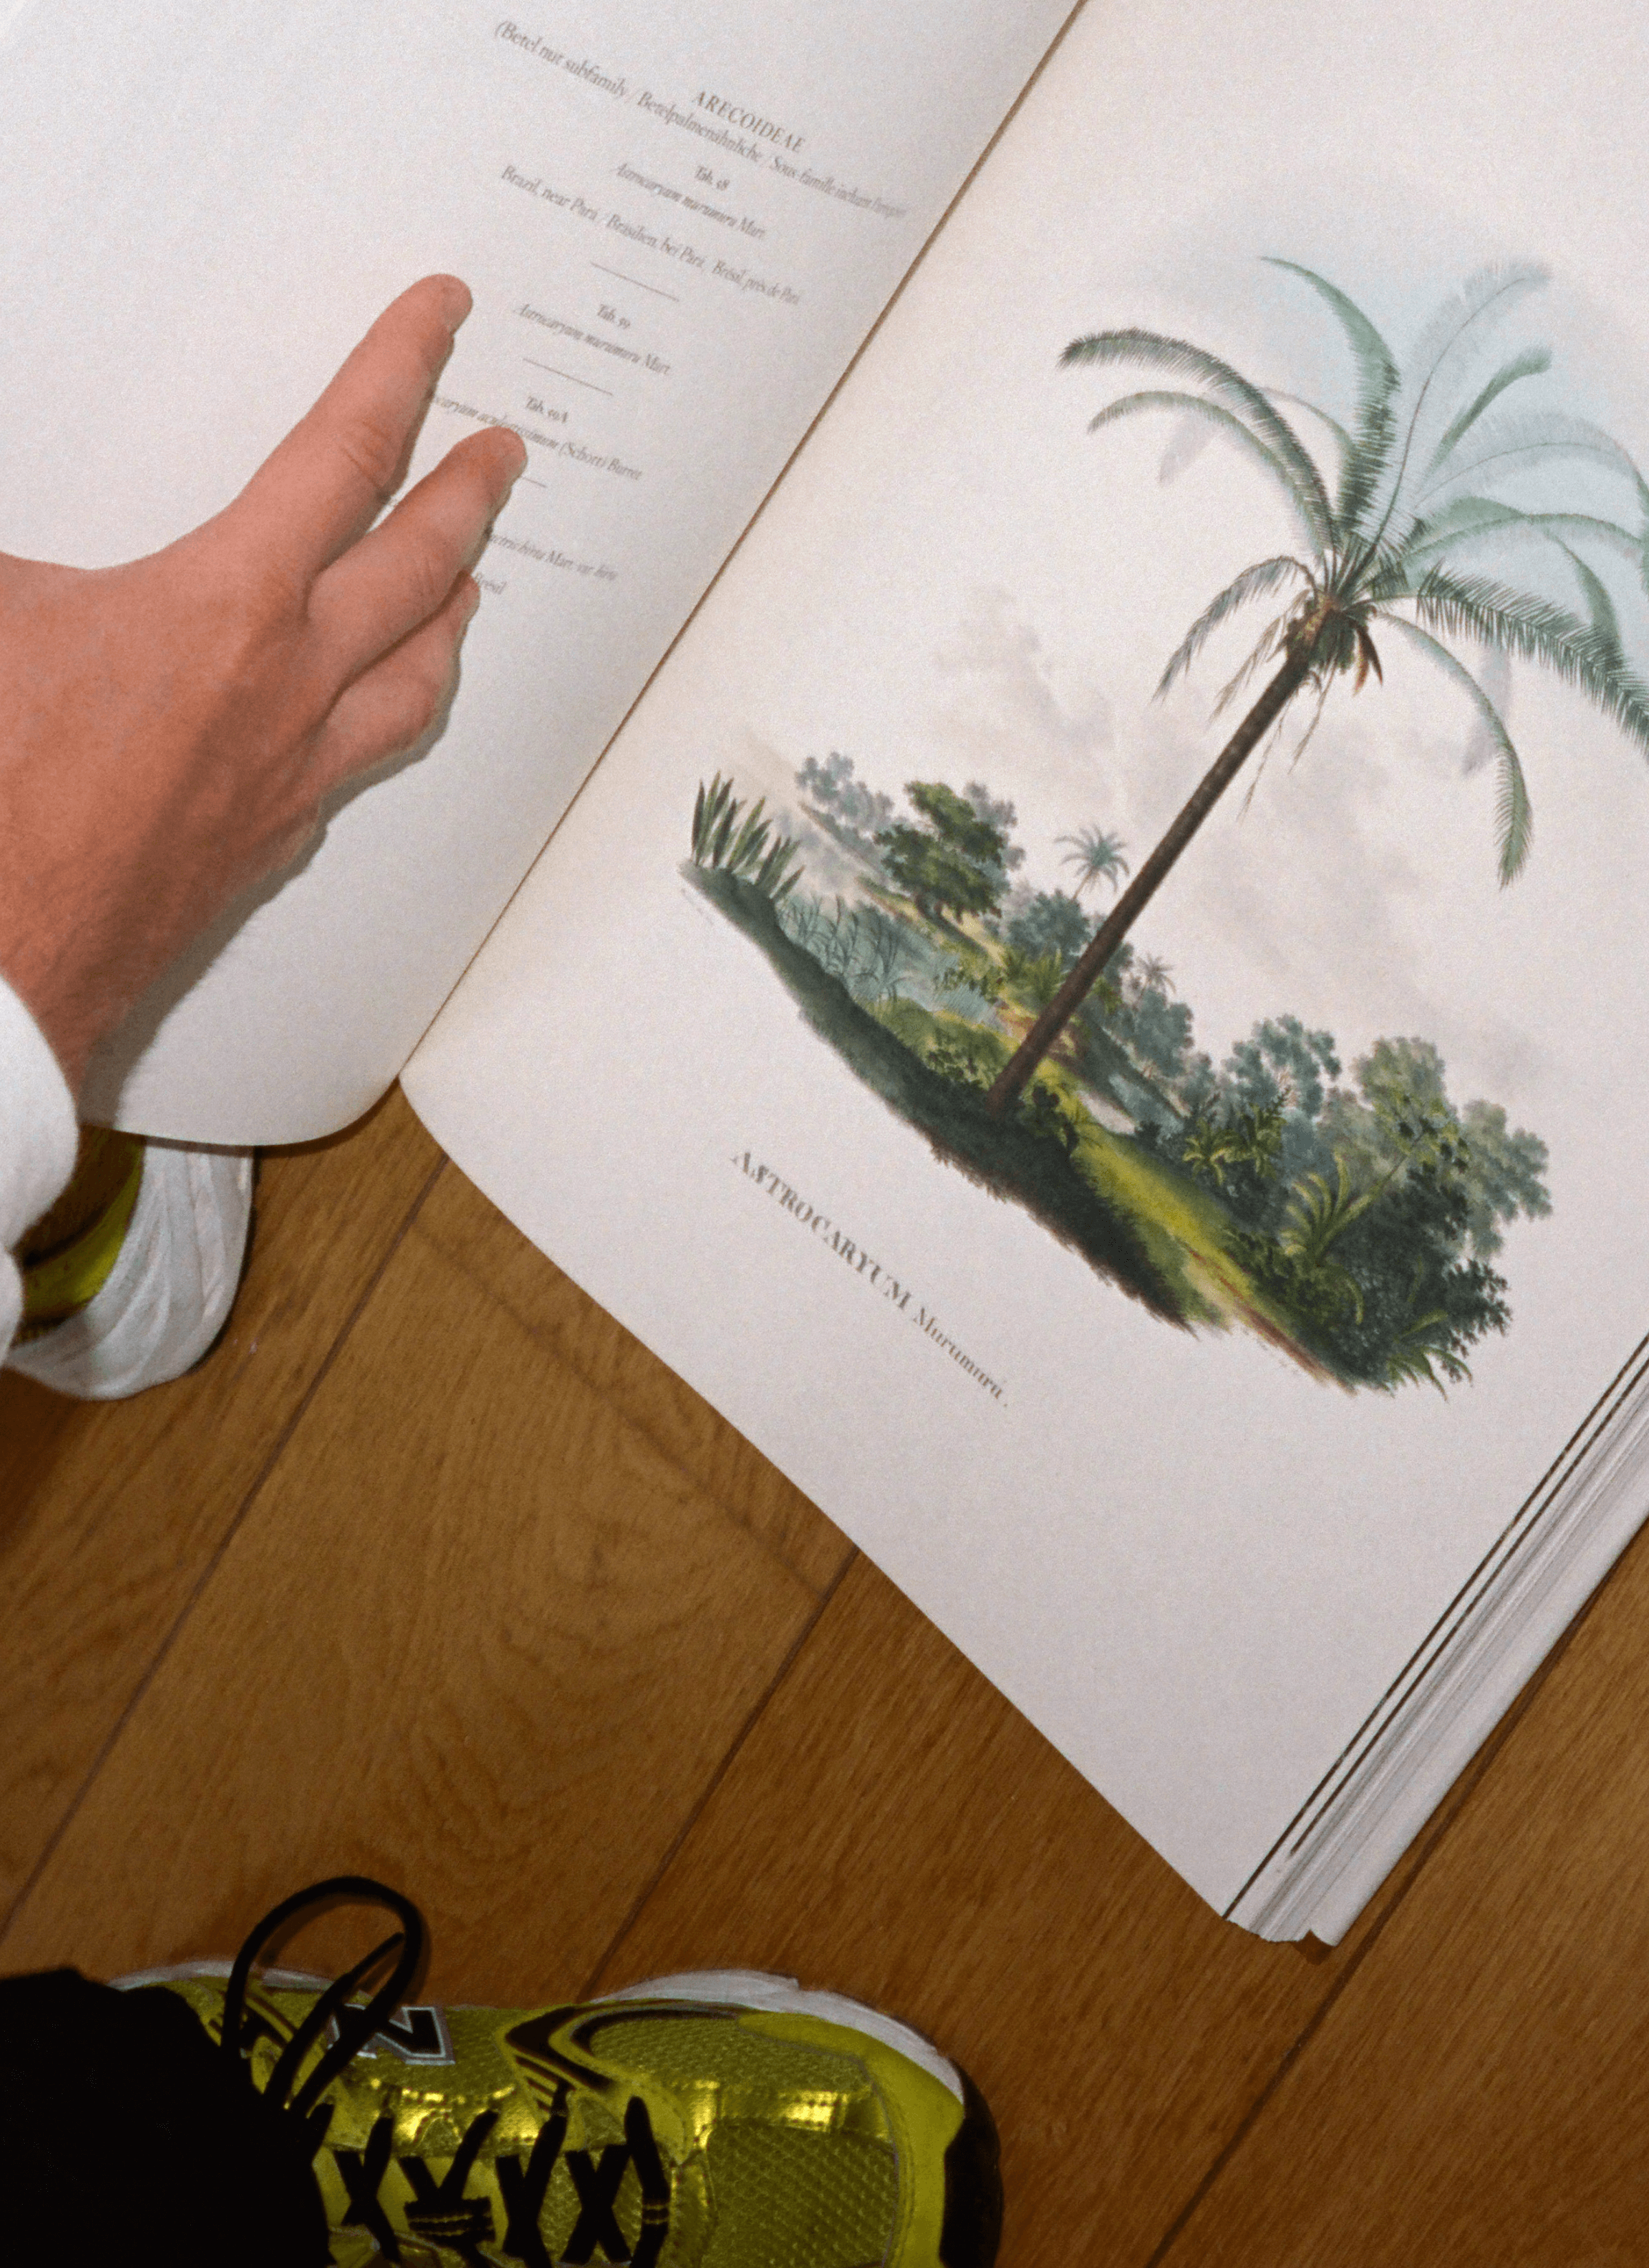 A book was opened with a person’s hand on the floor with a page of painting -  plenty of trees alongside a field of grass near a river with an outstanding coconut tree growing.